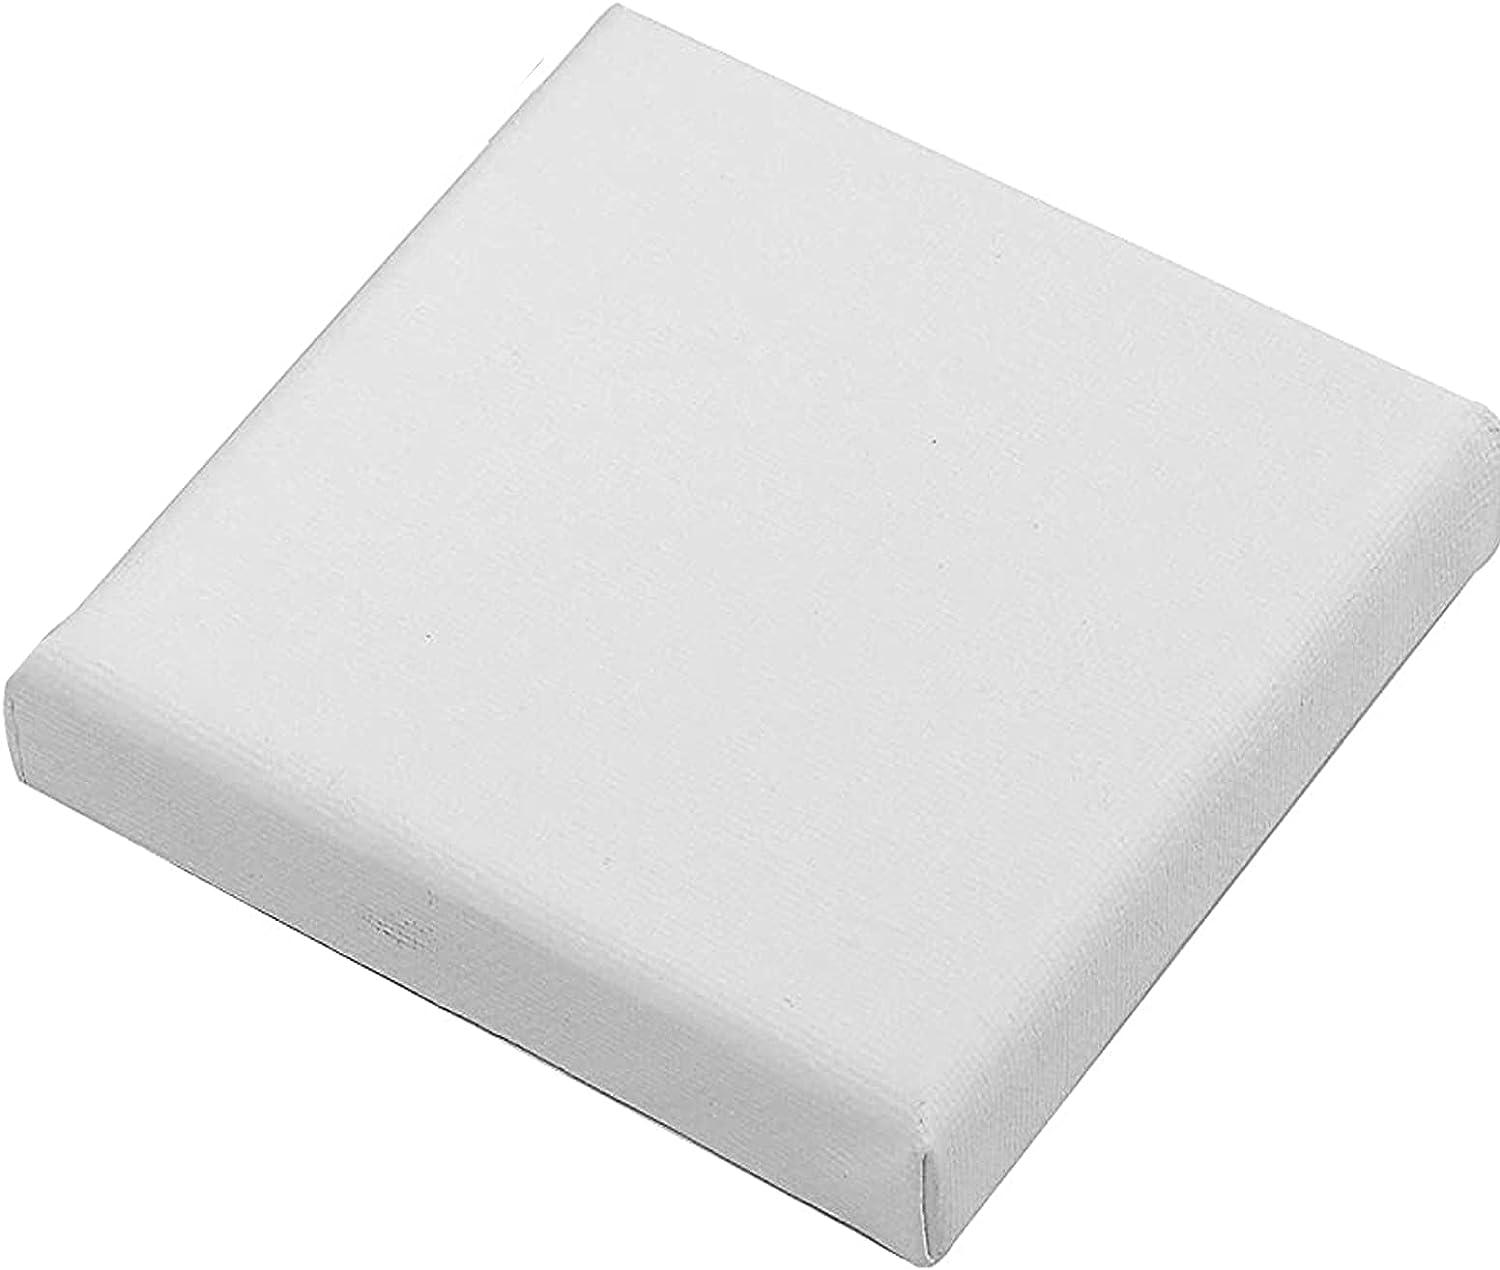 SL crafts Mini Stretched Canvas 4X4 (1 Pack of 6 Mini Canvases)